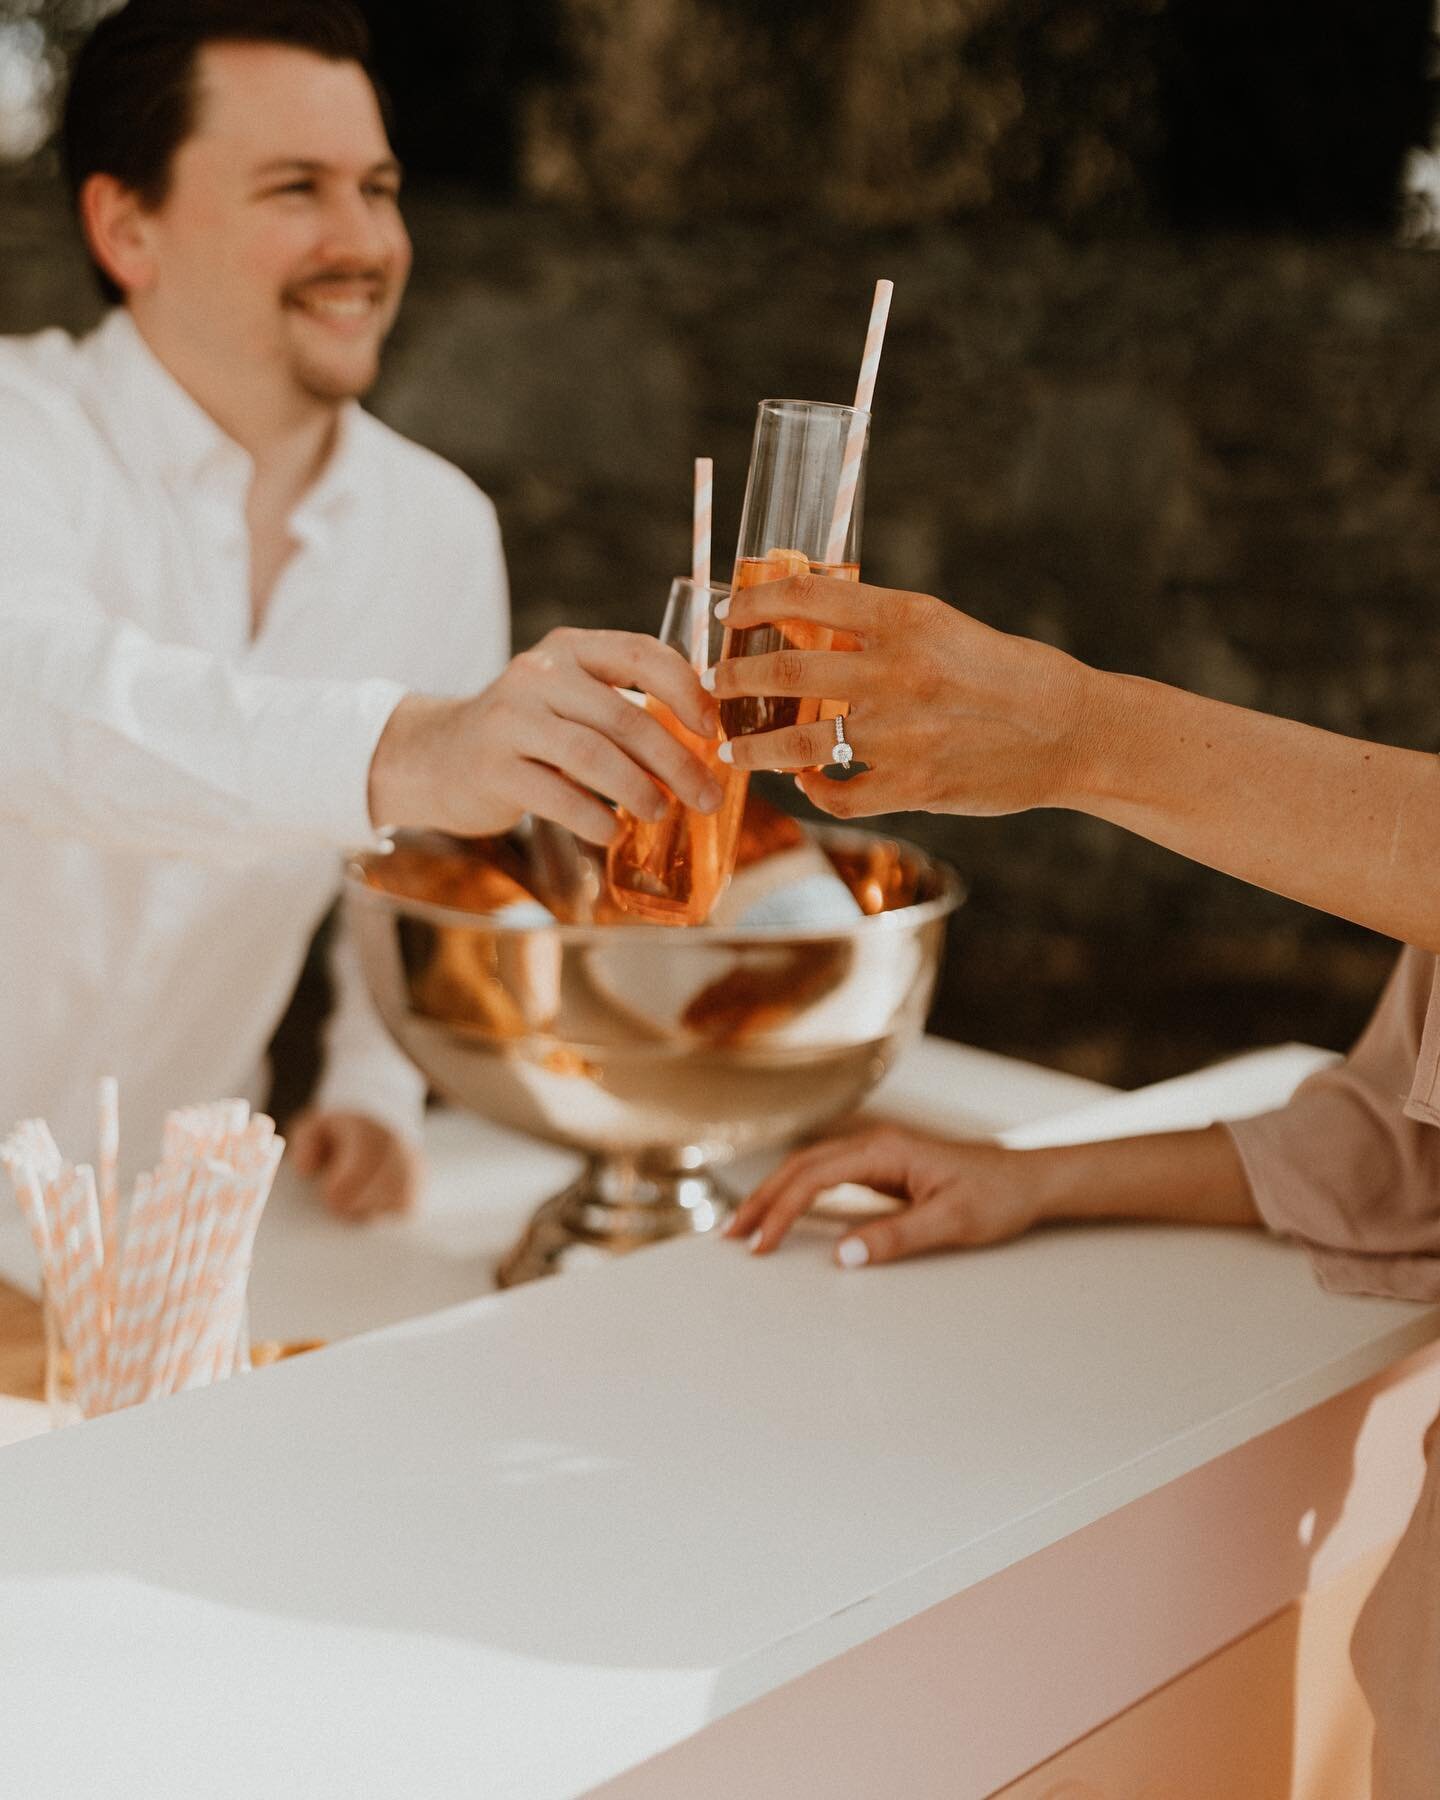 Recently engaged?! tiny bubbles would love to serve celebratory sparkling wine and signature spritzes at your engagement party! Check out the inquiry form on our website or email us for more information today! 🥂
.
.
.
📷: @hayleysimmonsphotography

